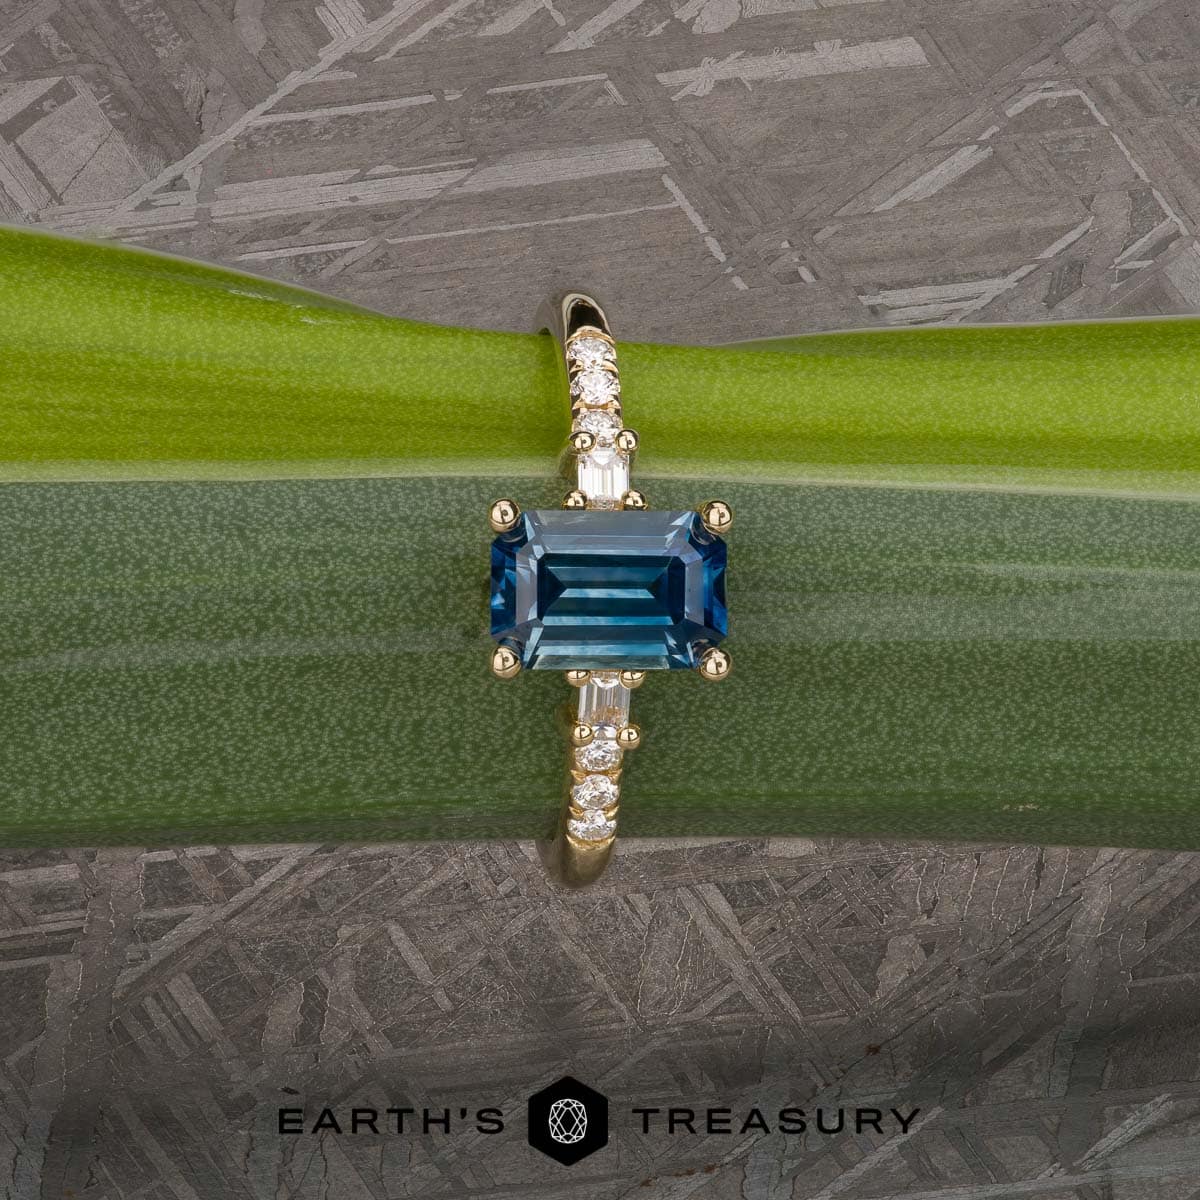 The “Fiona” in 18k yellow gold with 0.91-carat Montana sapphire